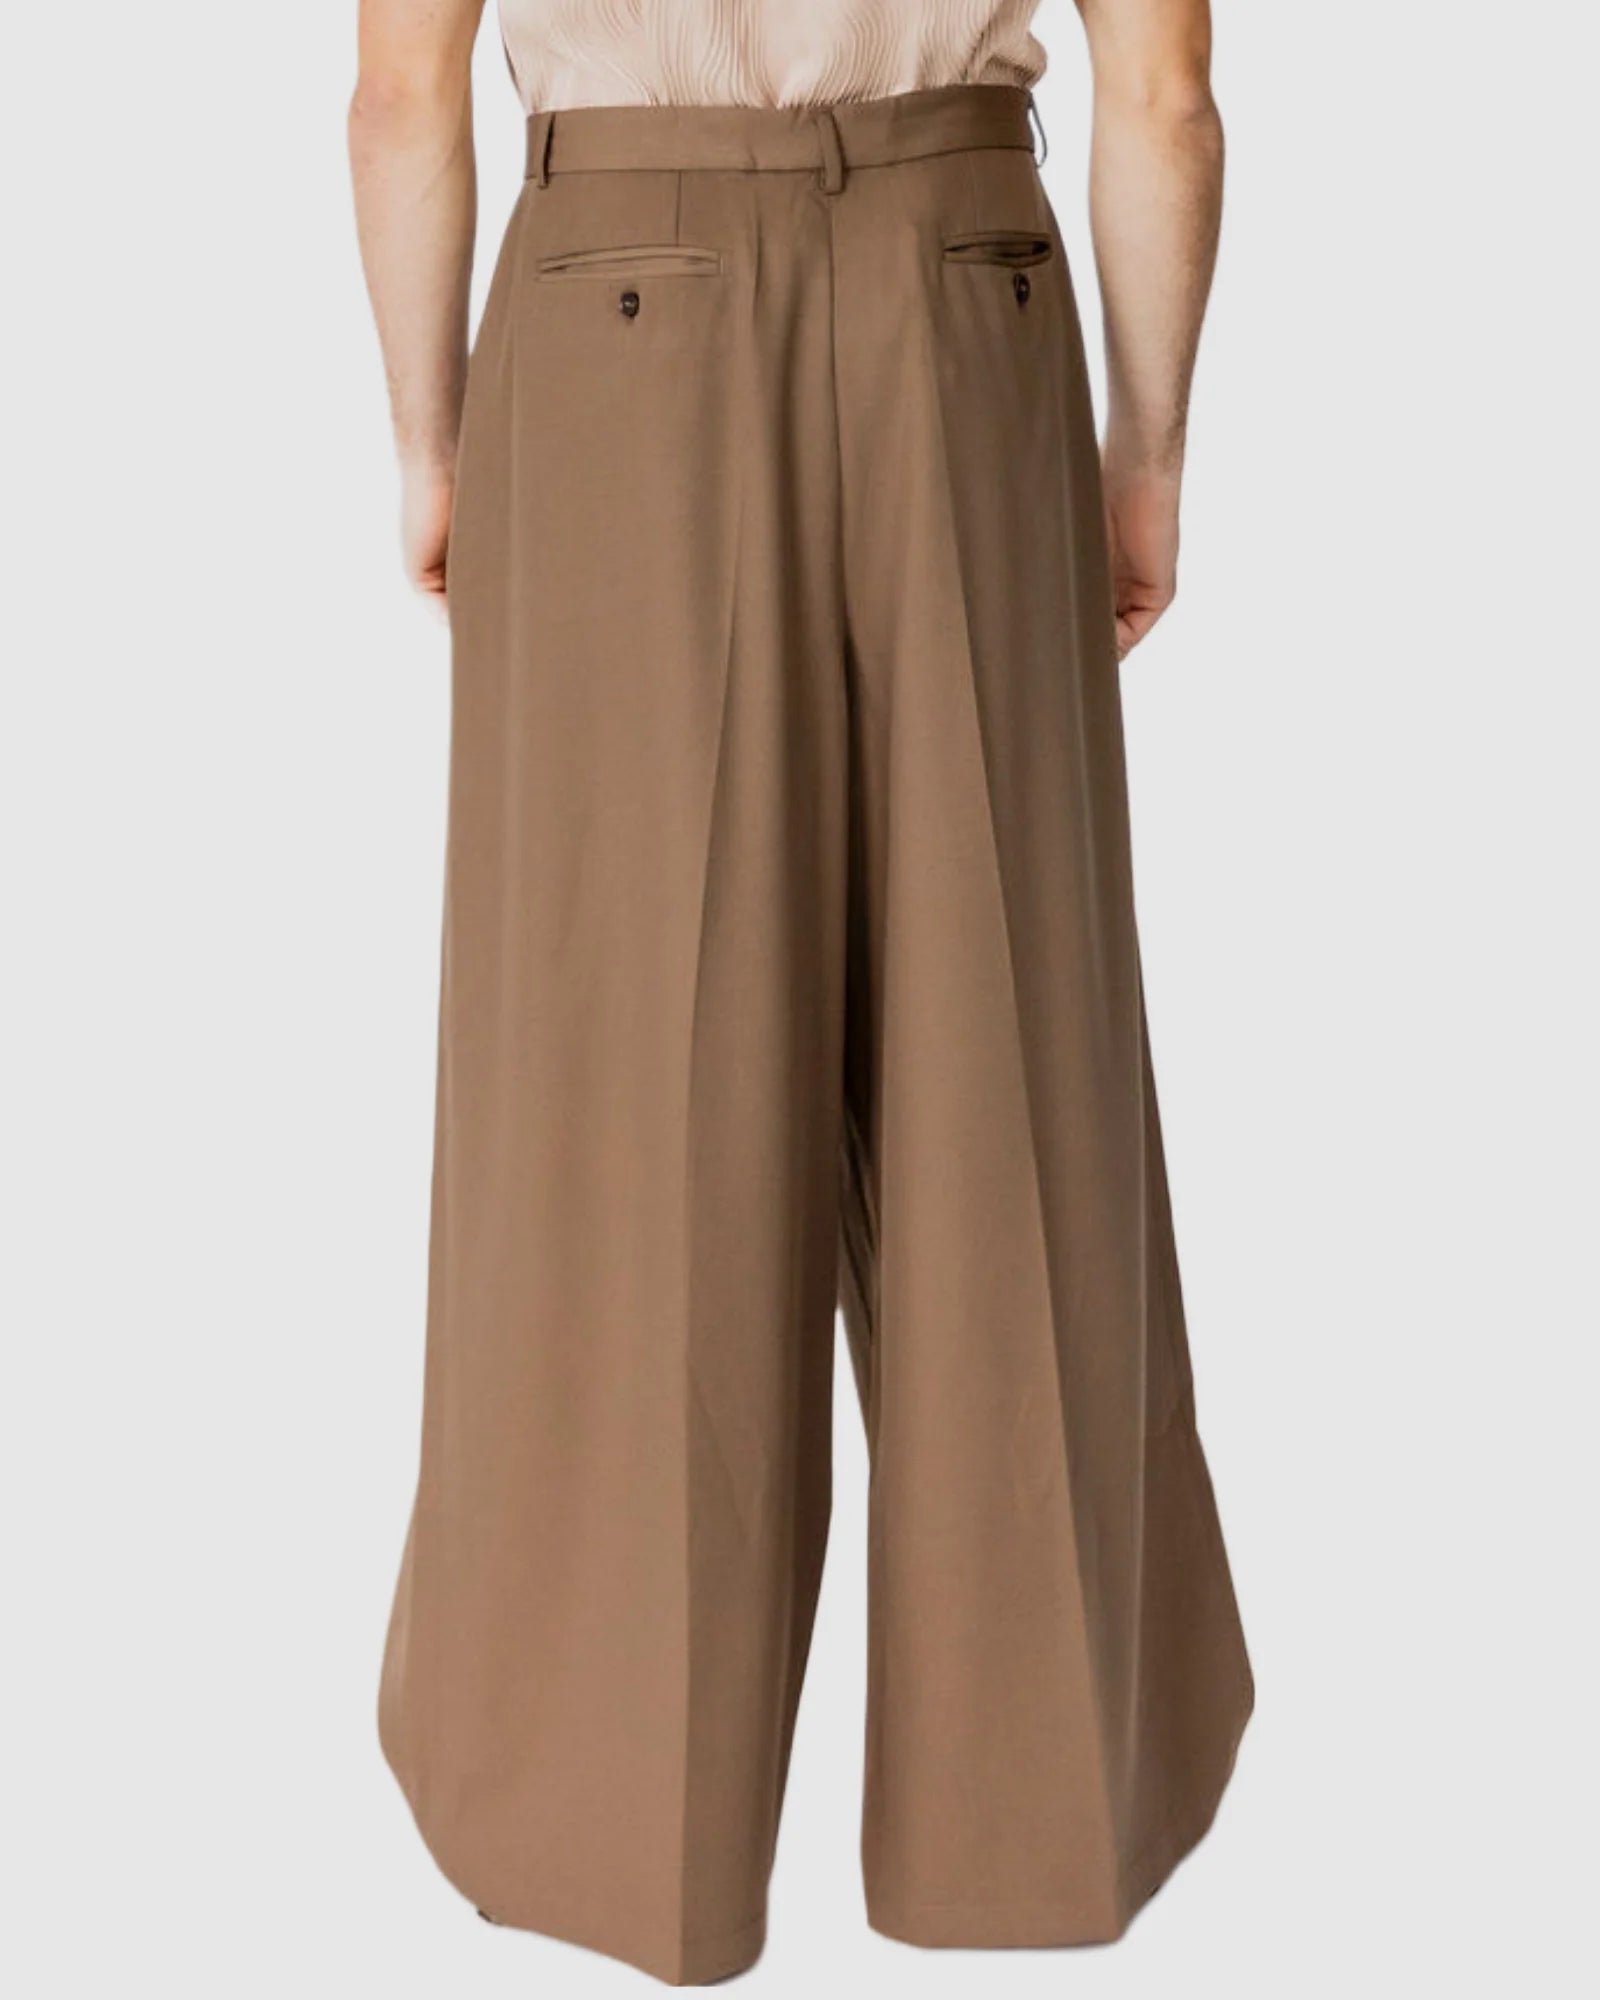 Justin Cassin Adrian Wide Leg Trousers in Brown Color 4